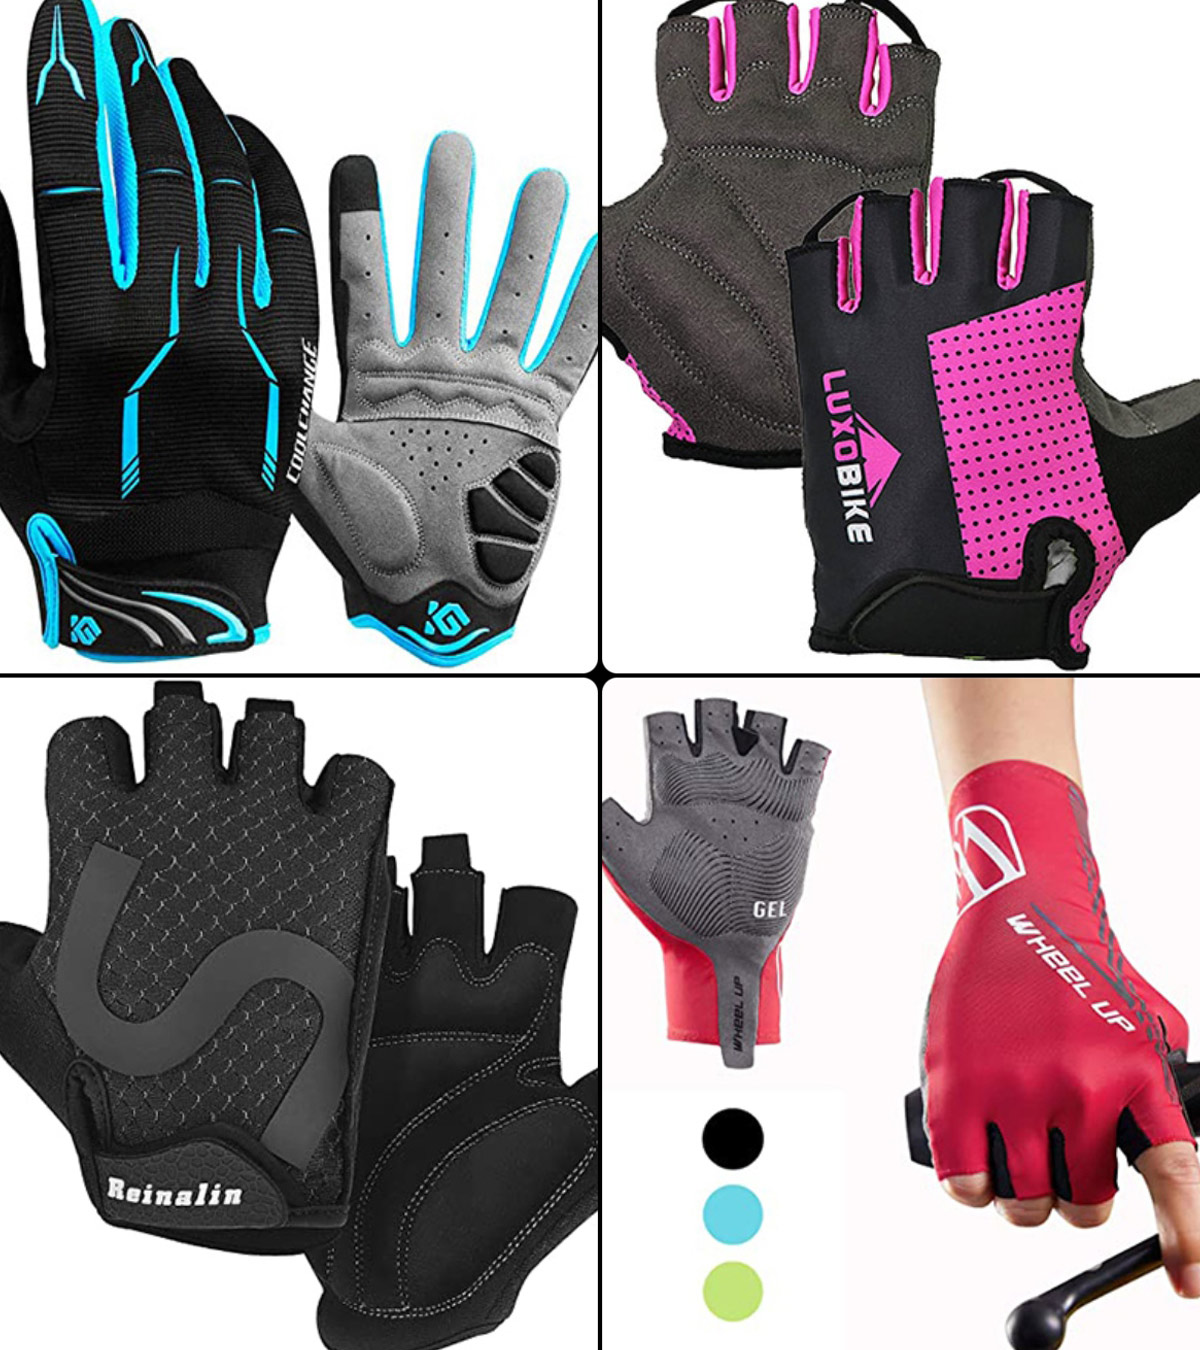 Bike Gloves - Riding Gloves to Improve Your Experience